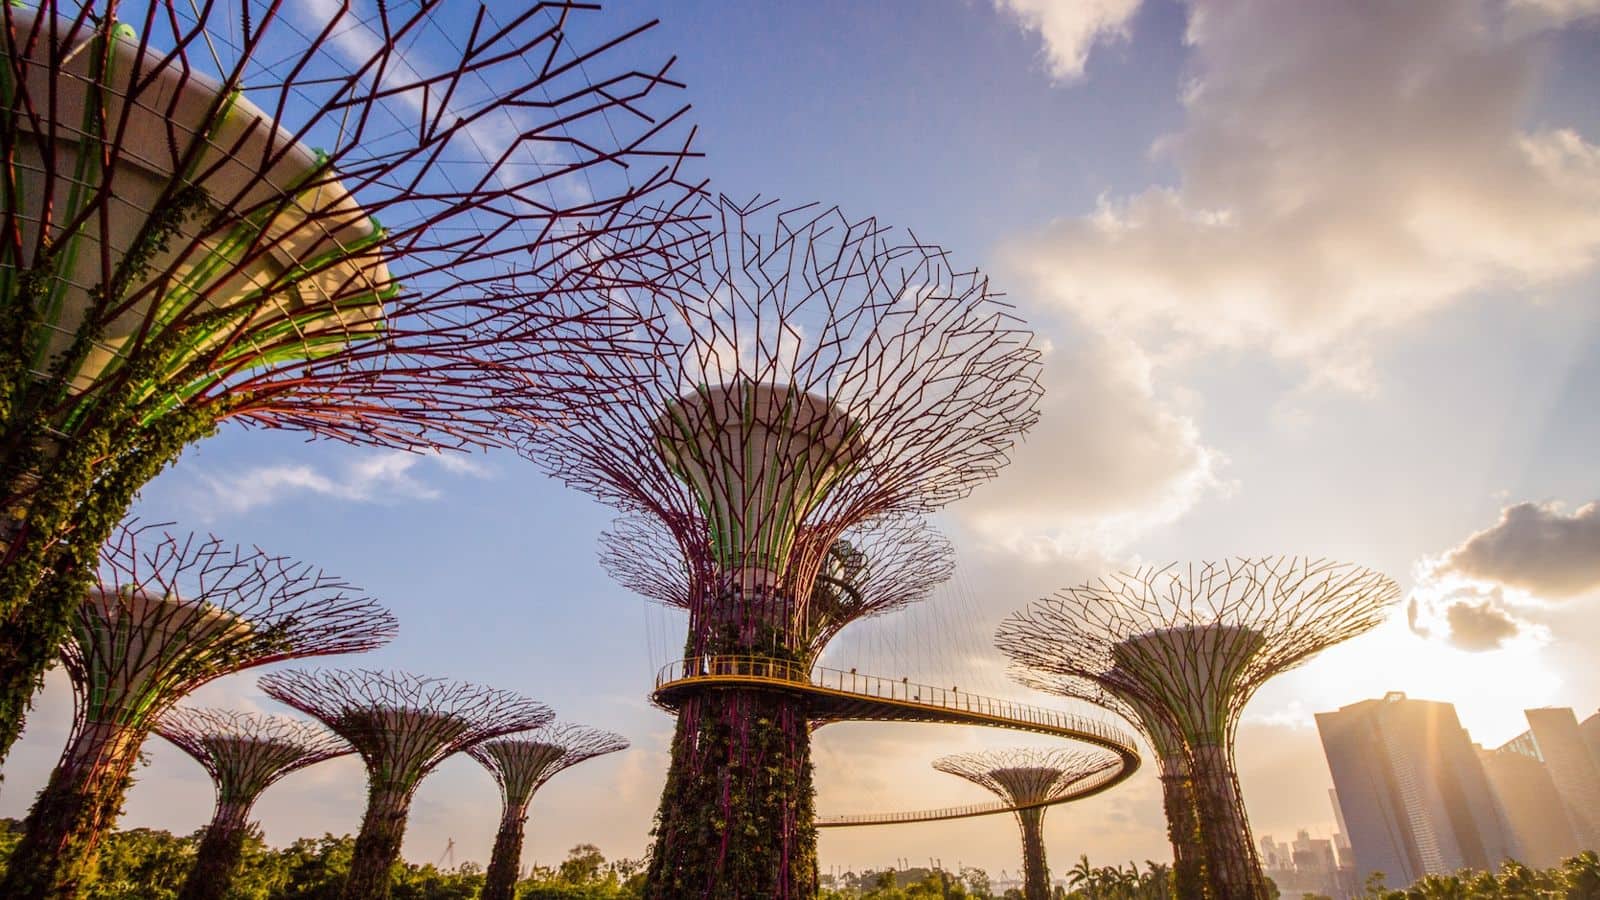 Recommendations for a futuristic family adventure in Singapore